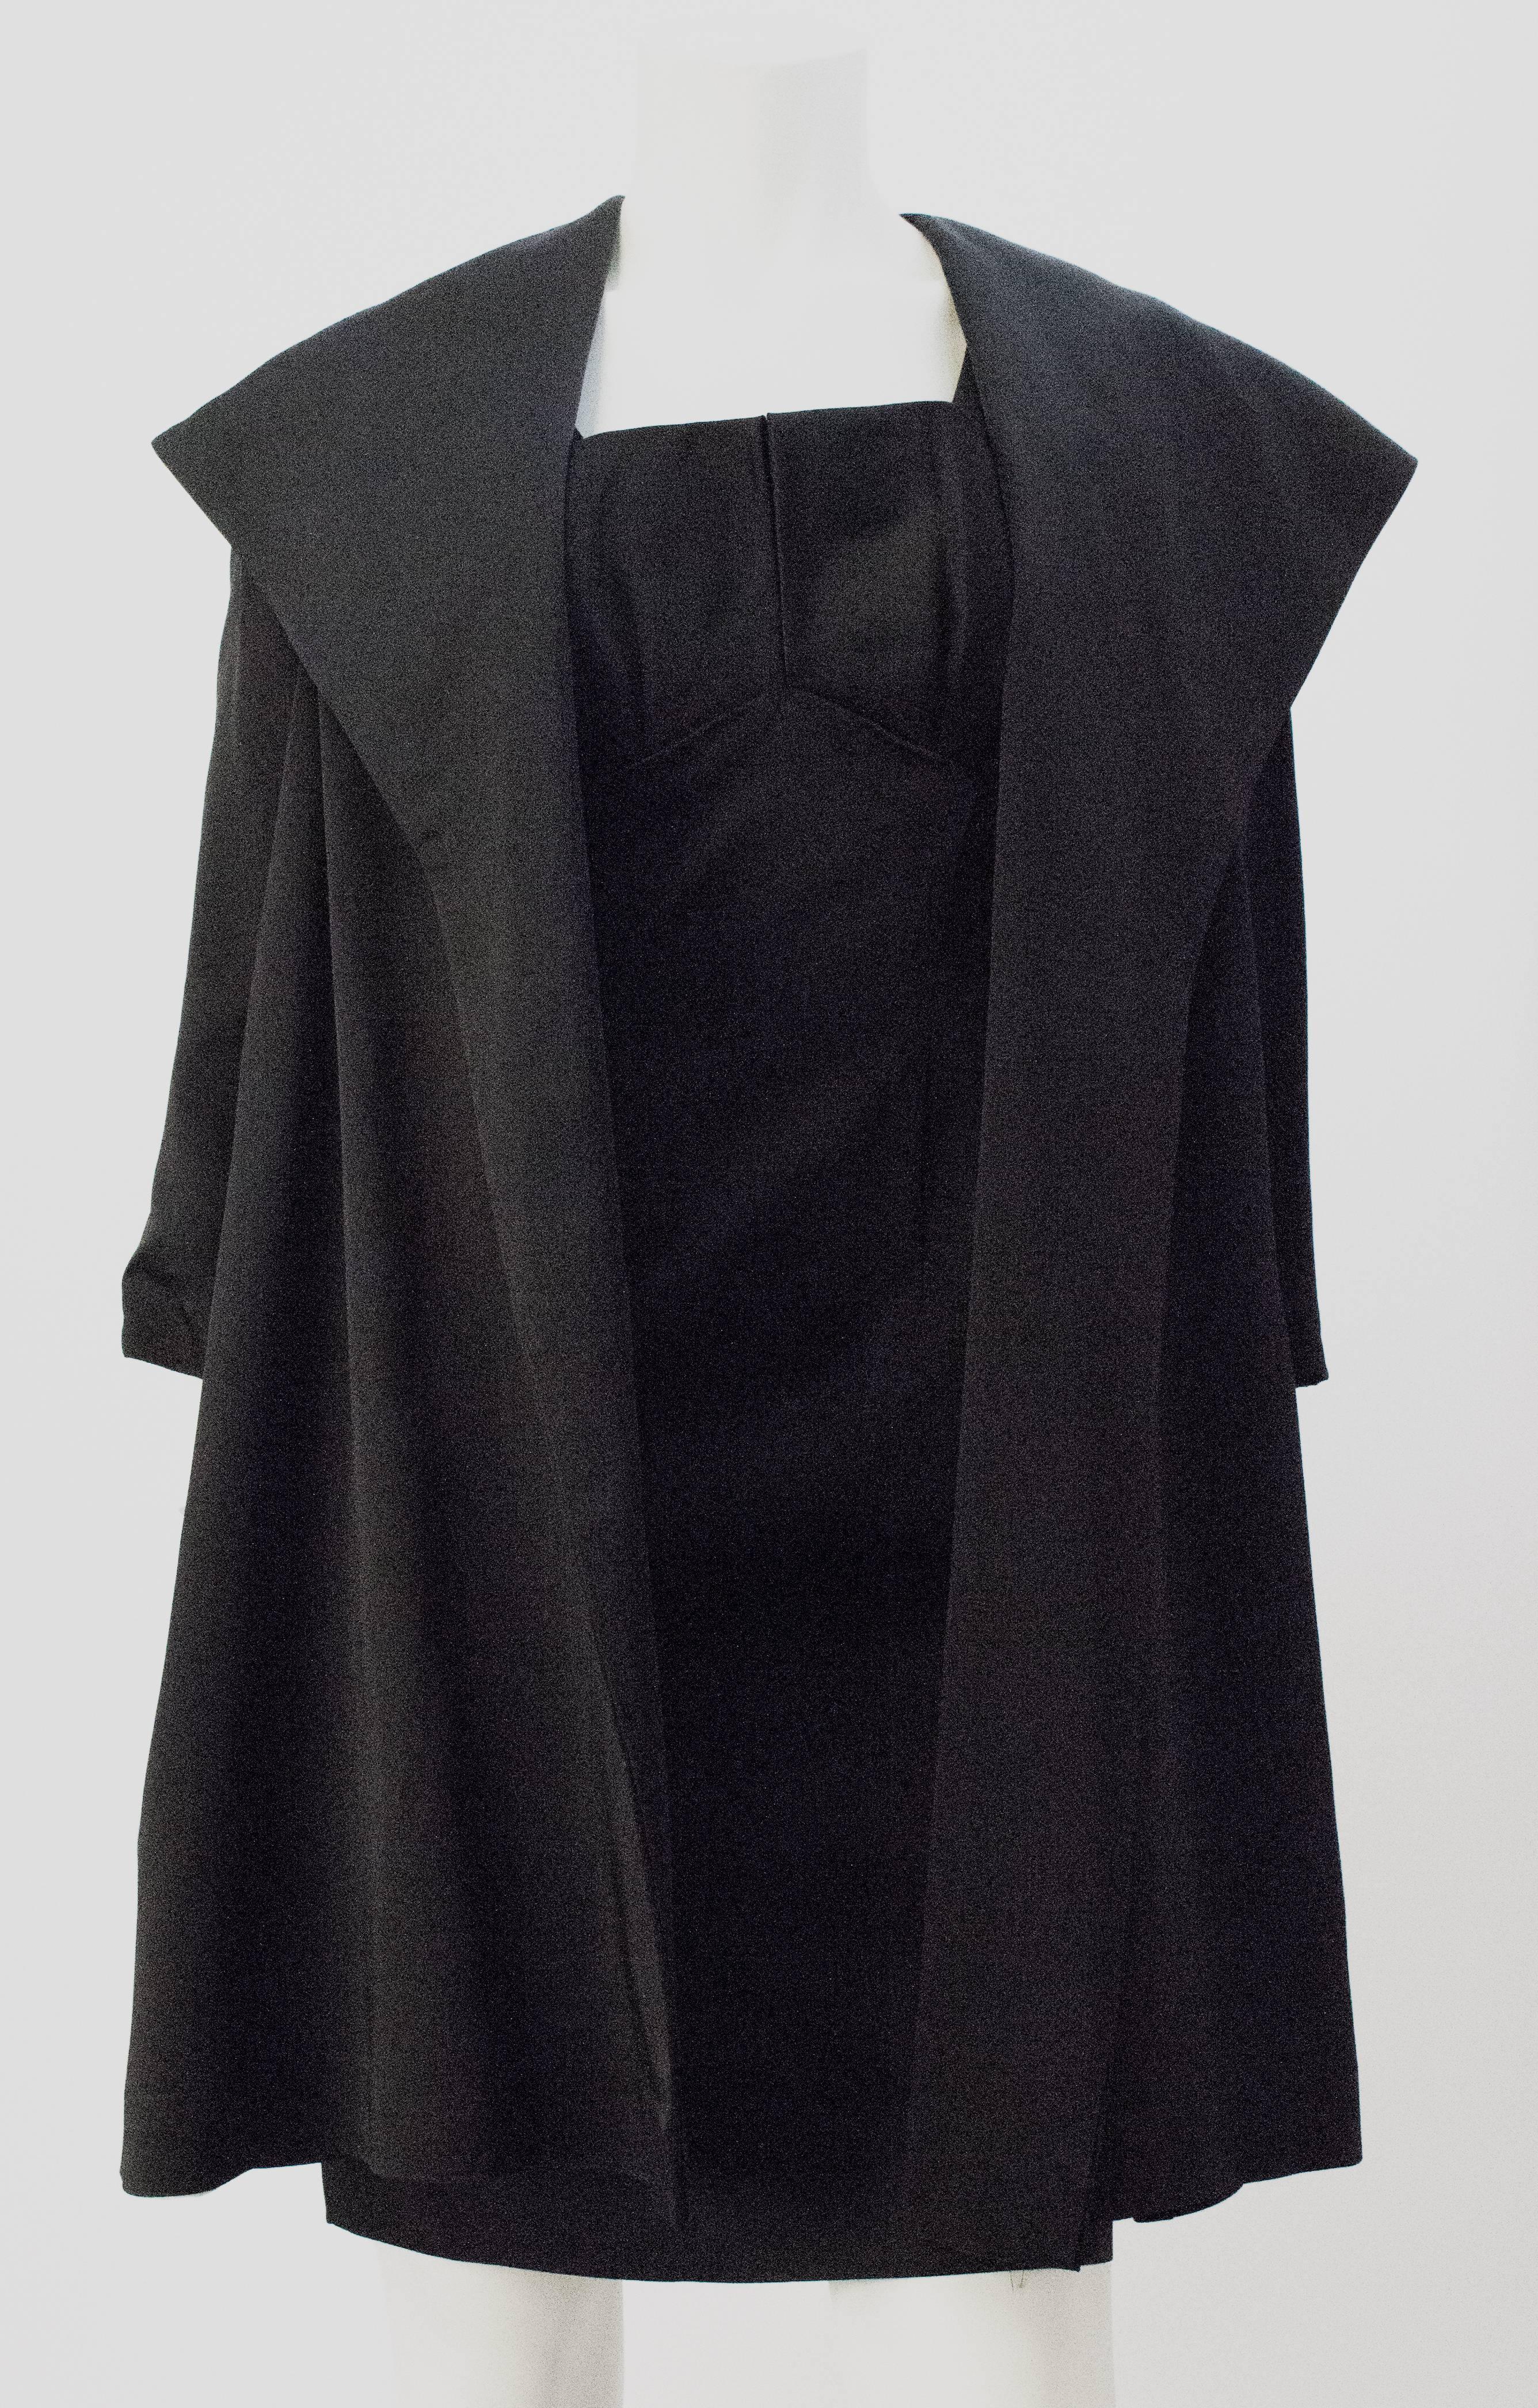 (Coat Only) 50s black satin cocktail sheath dress with a pleated shell bust comes with a matching black satin evening coat which has a champagne satin lining. Rear center metal zip closure on dress.

Dress Measurements:

bust-

nape to waist-

arm